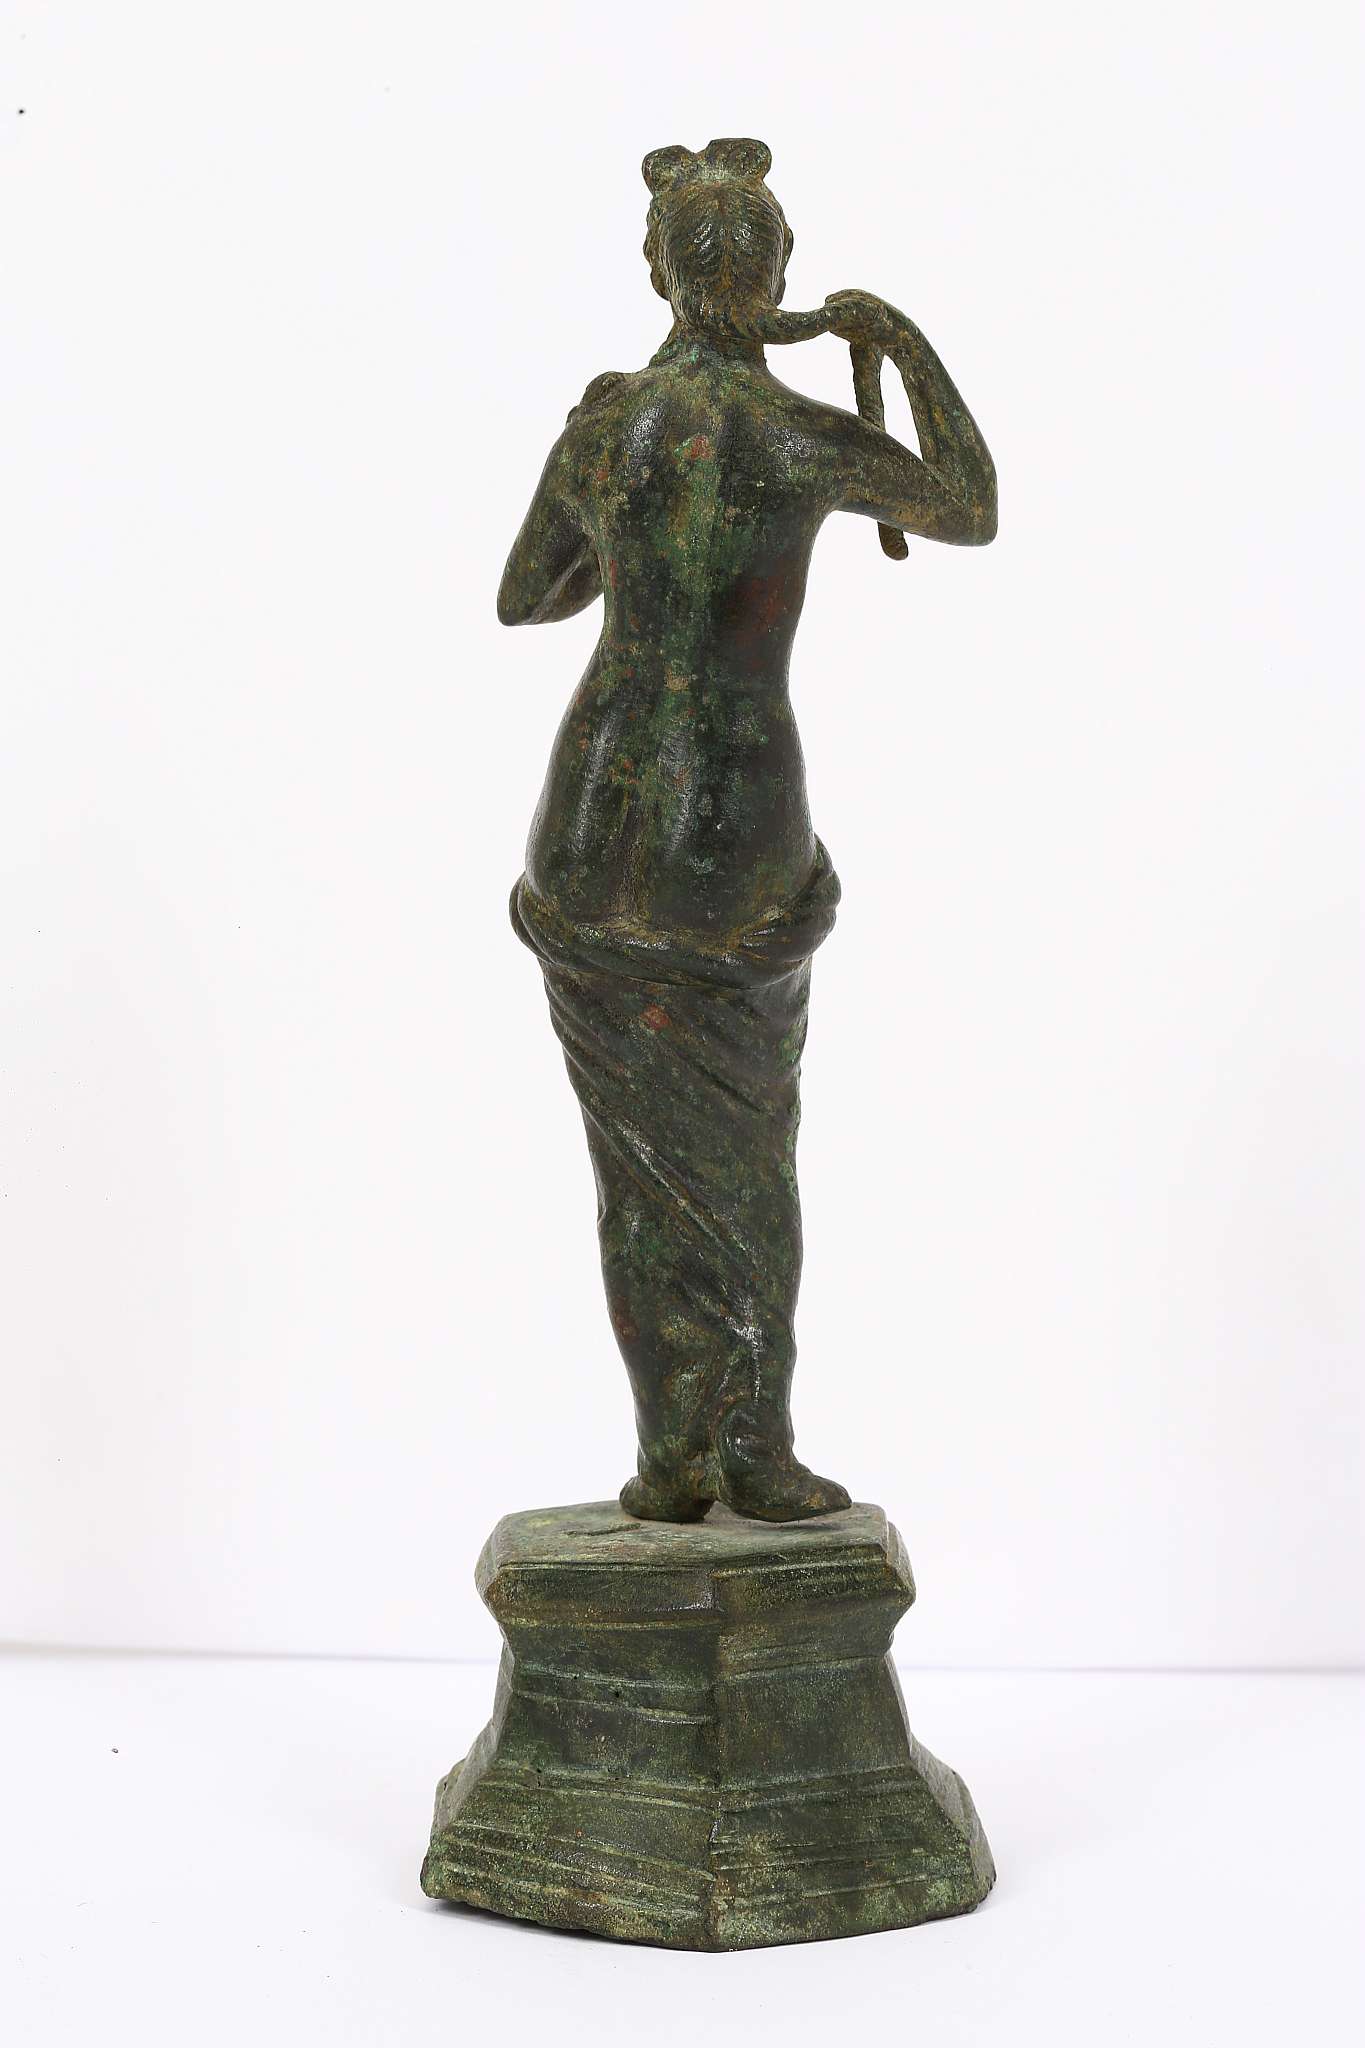 A ROMAN BRONZE APHRODITE Circa 1st - 2nd century A.D. "..there is nothing among the blessed gods - Image 4 of 6